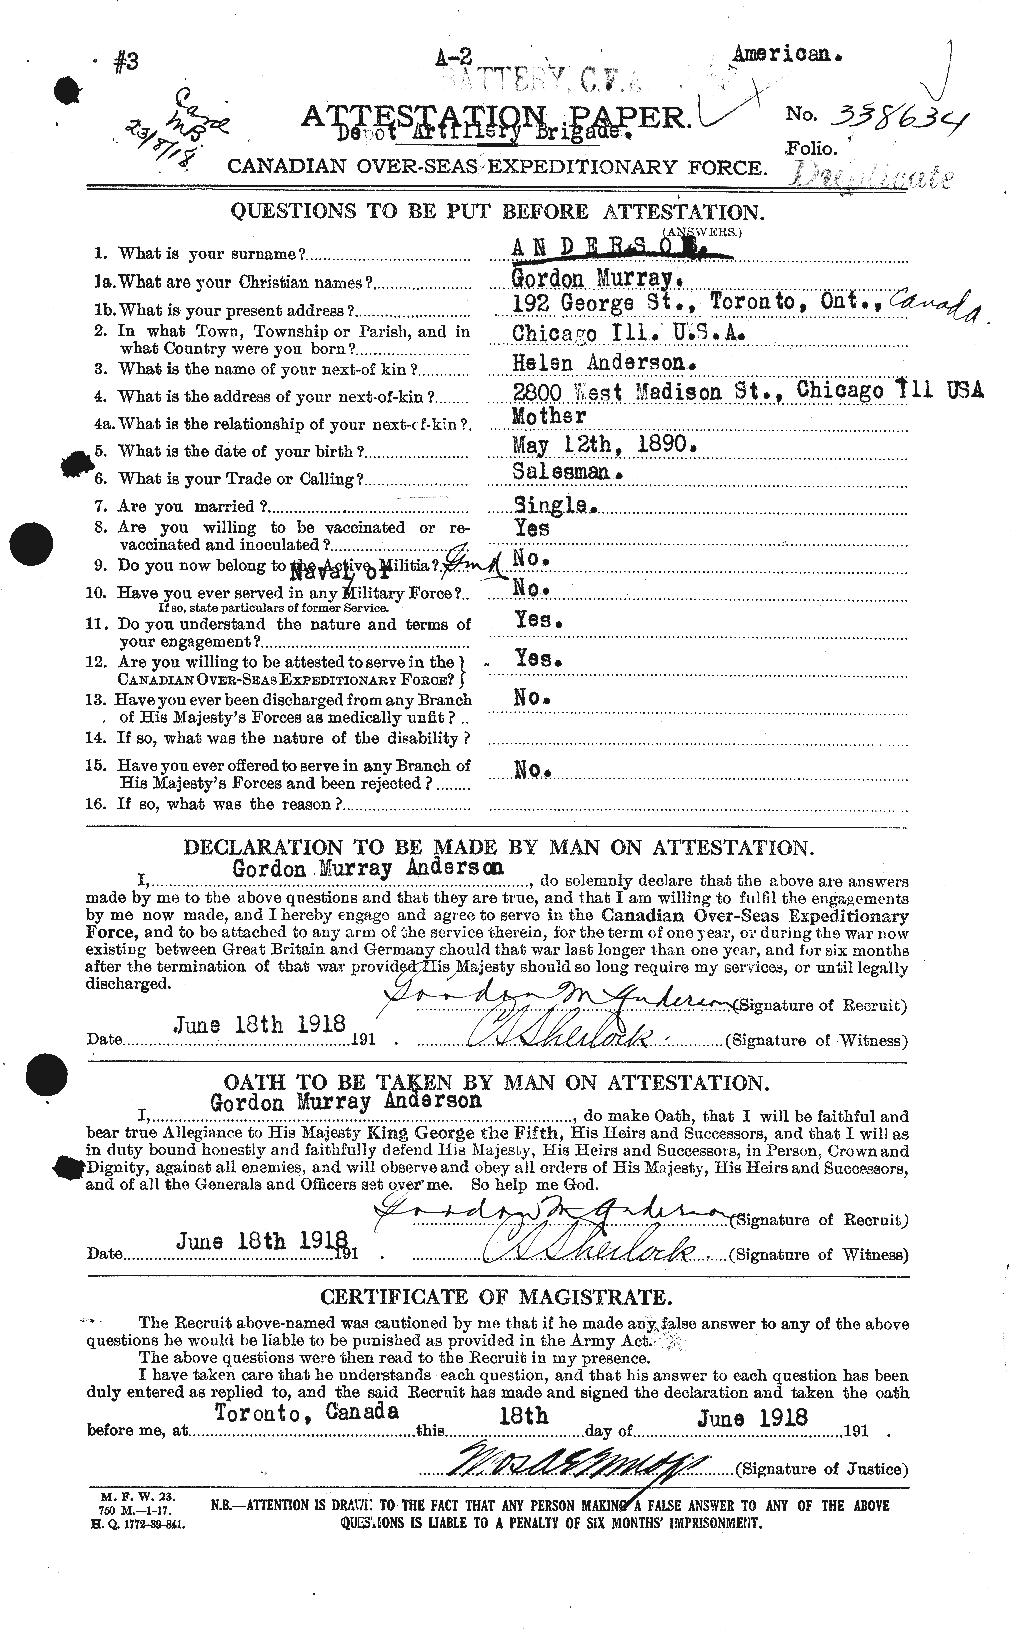 Personnel Records of the First World War - CEF 209662a